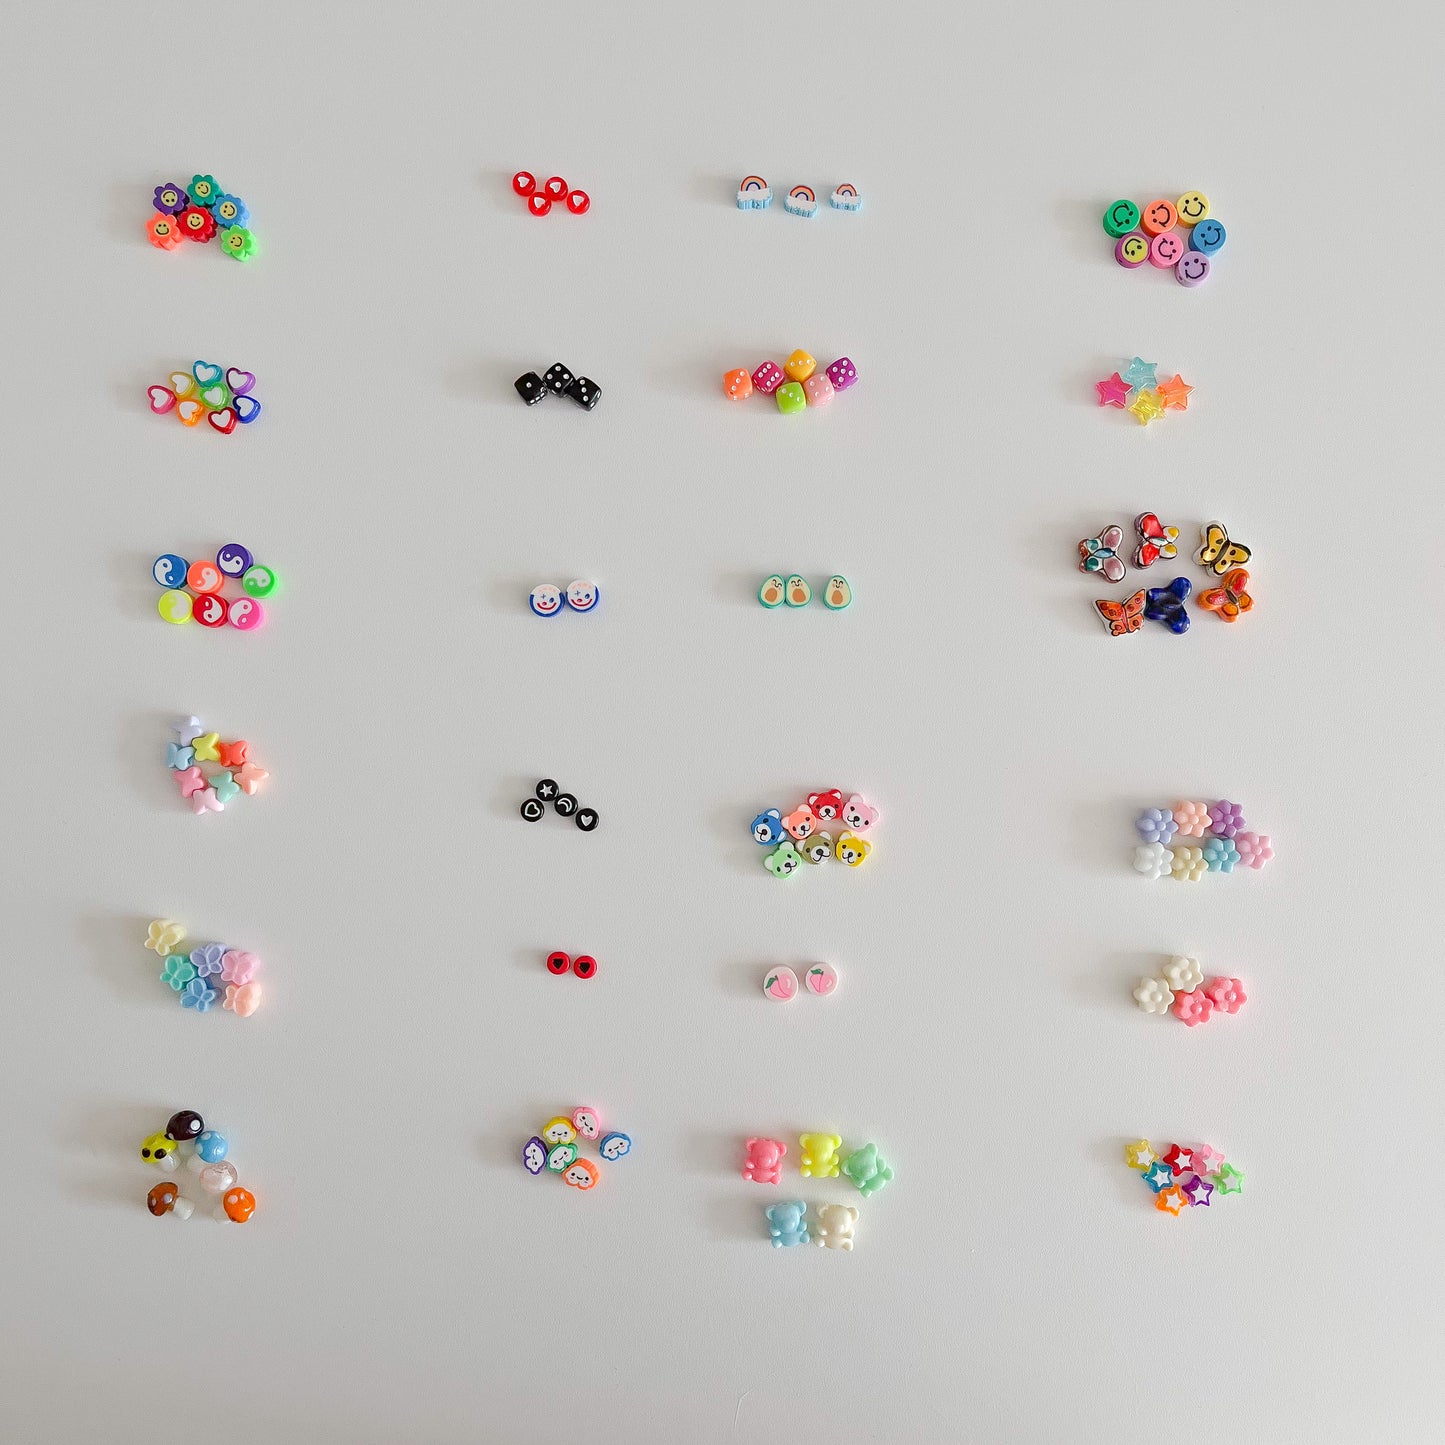 Assorted beads to choose from when creating a custom Drake/Aubrey set.